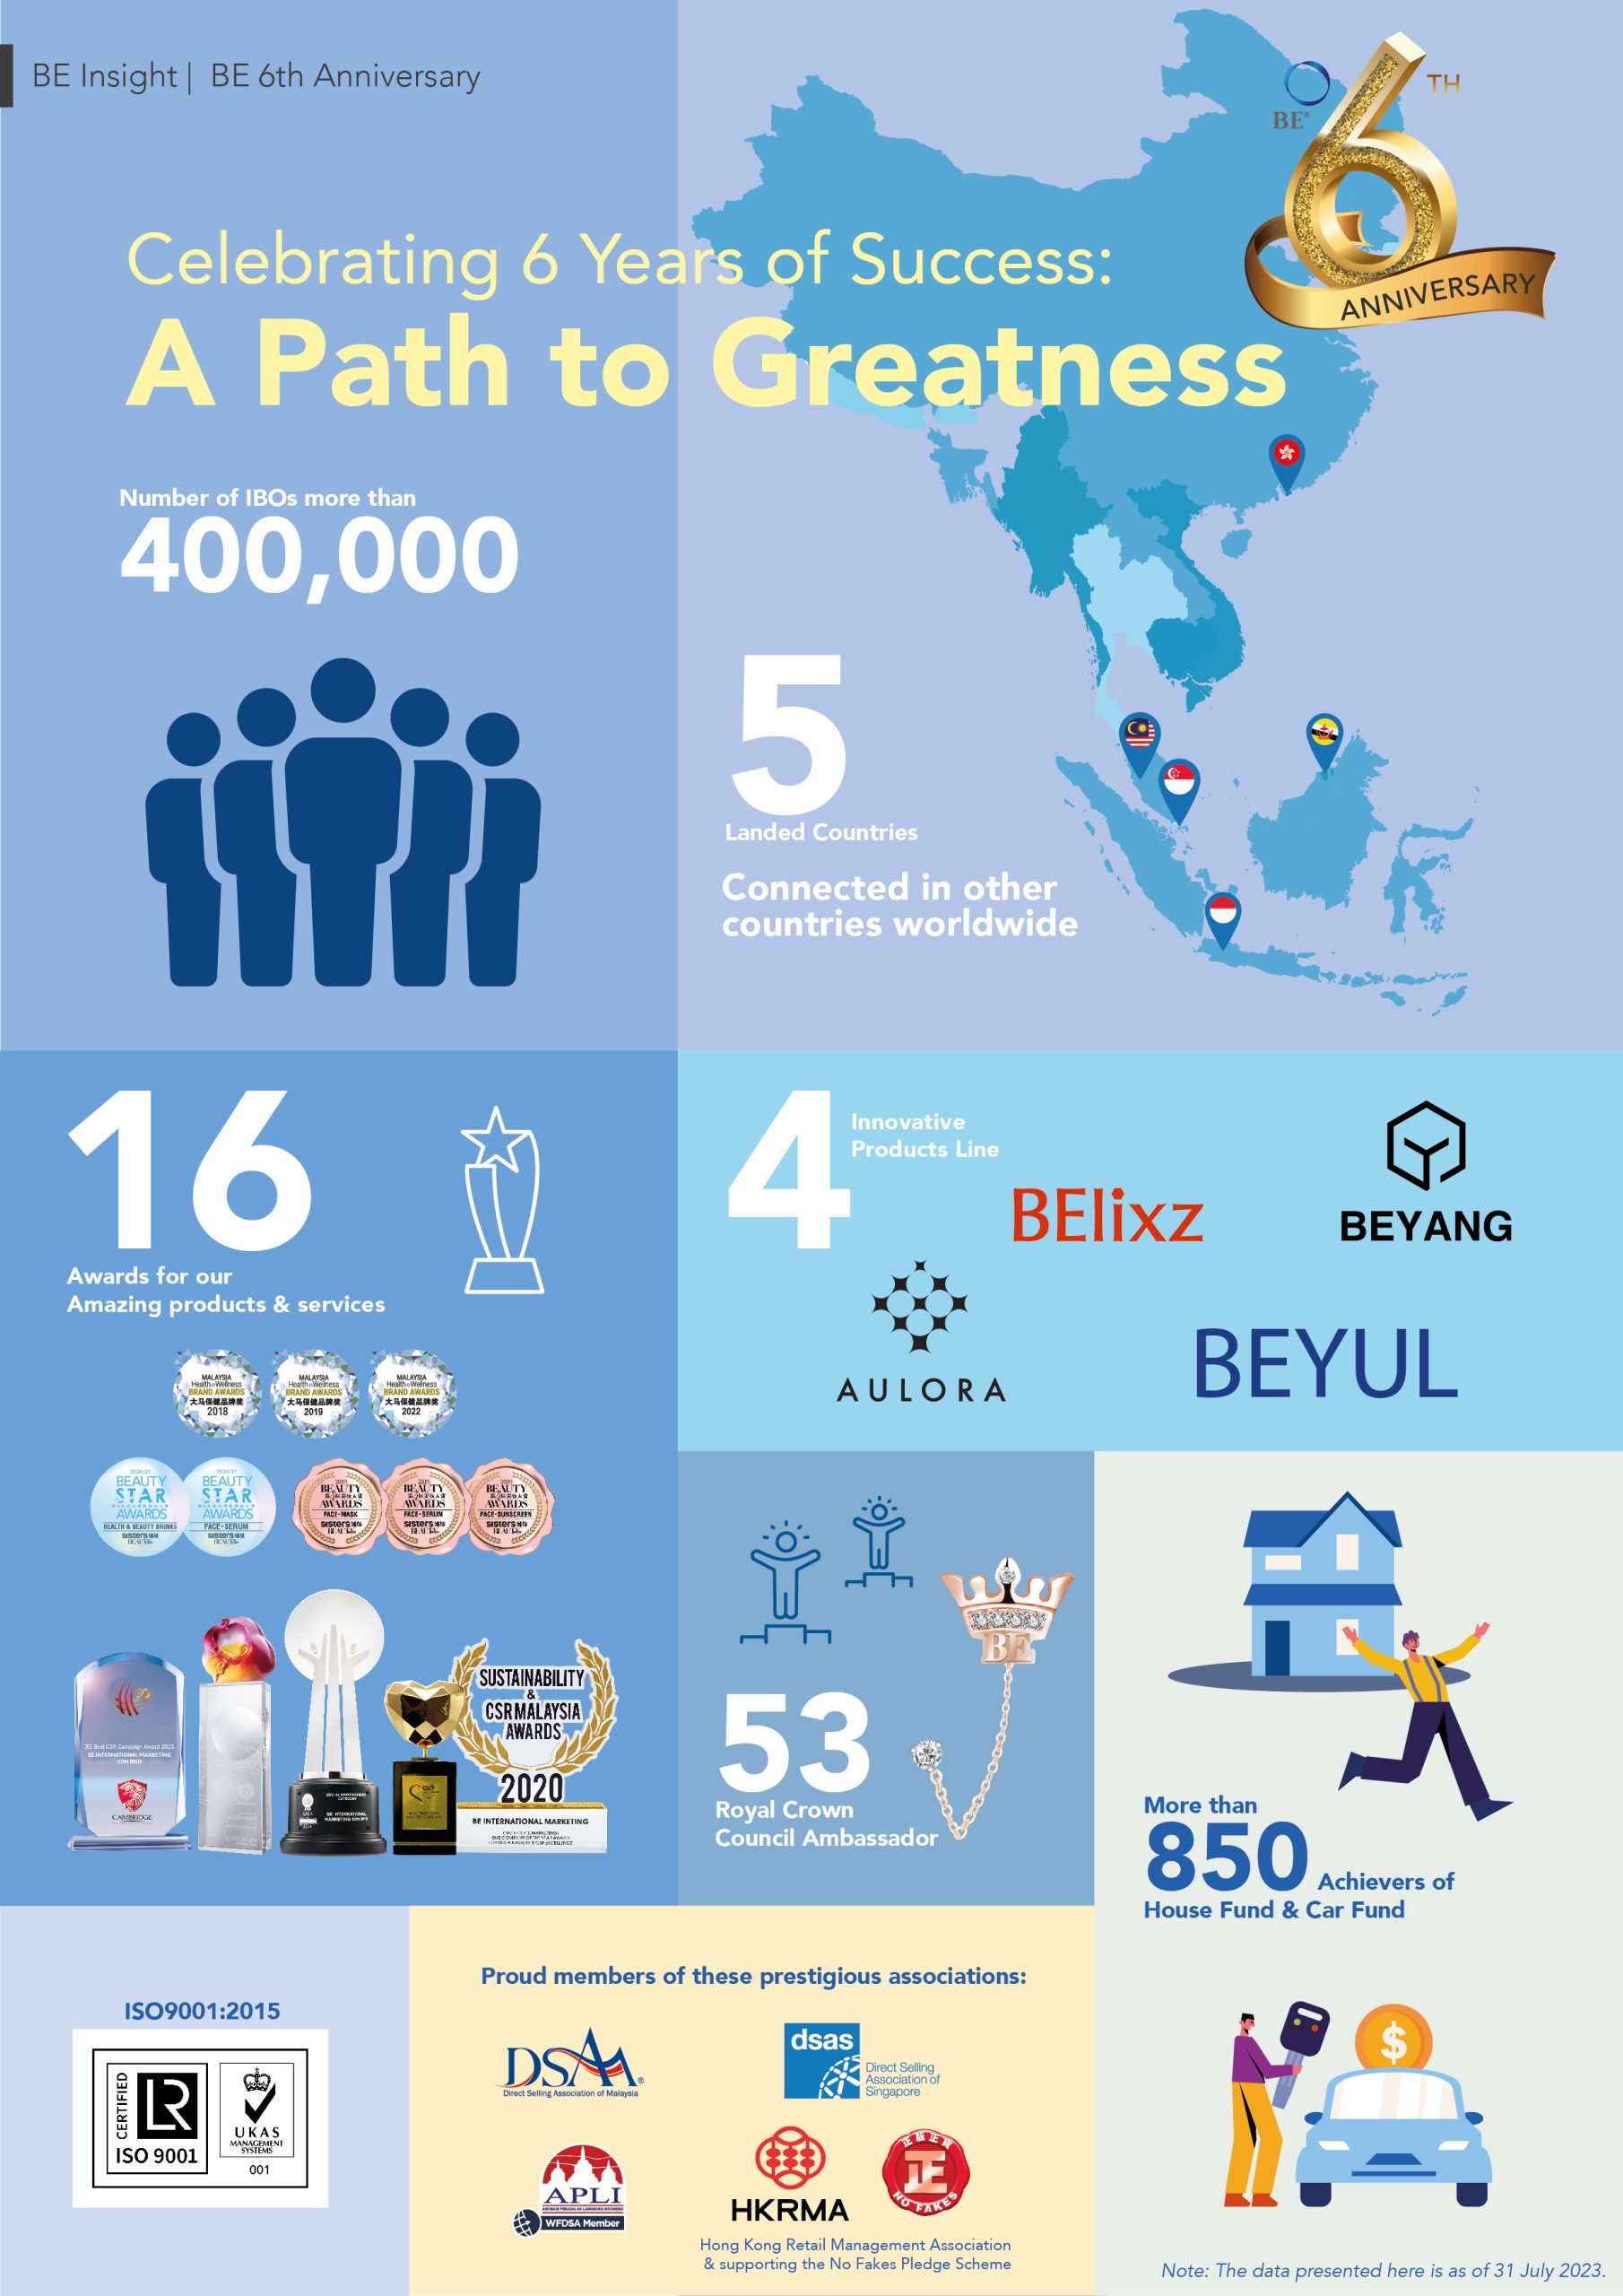 Celebrating 6 Years of Success: A Path to Greatness